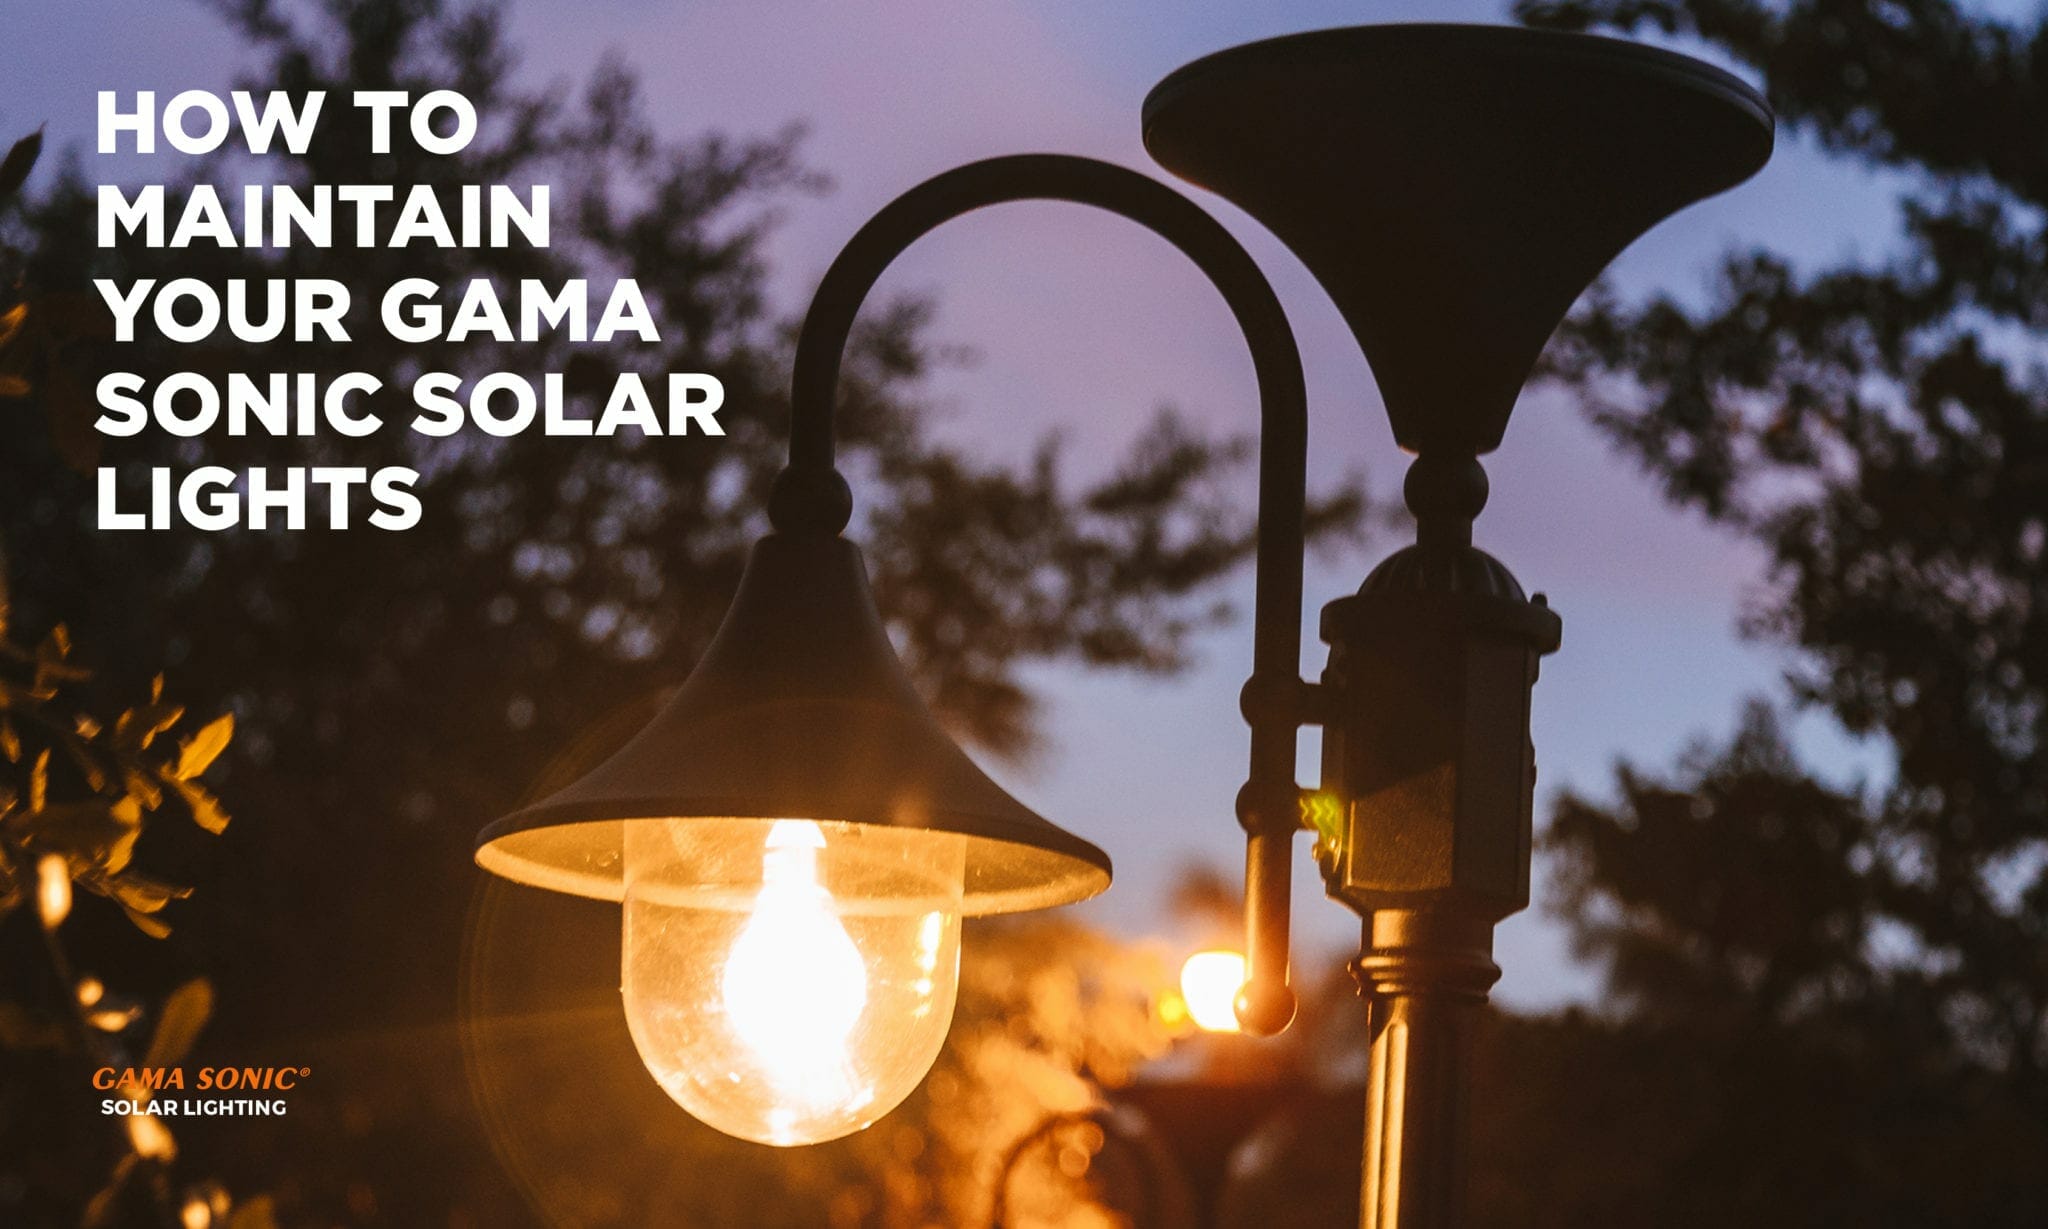 How to Maintain Your Gama Sonic Solar Lights